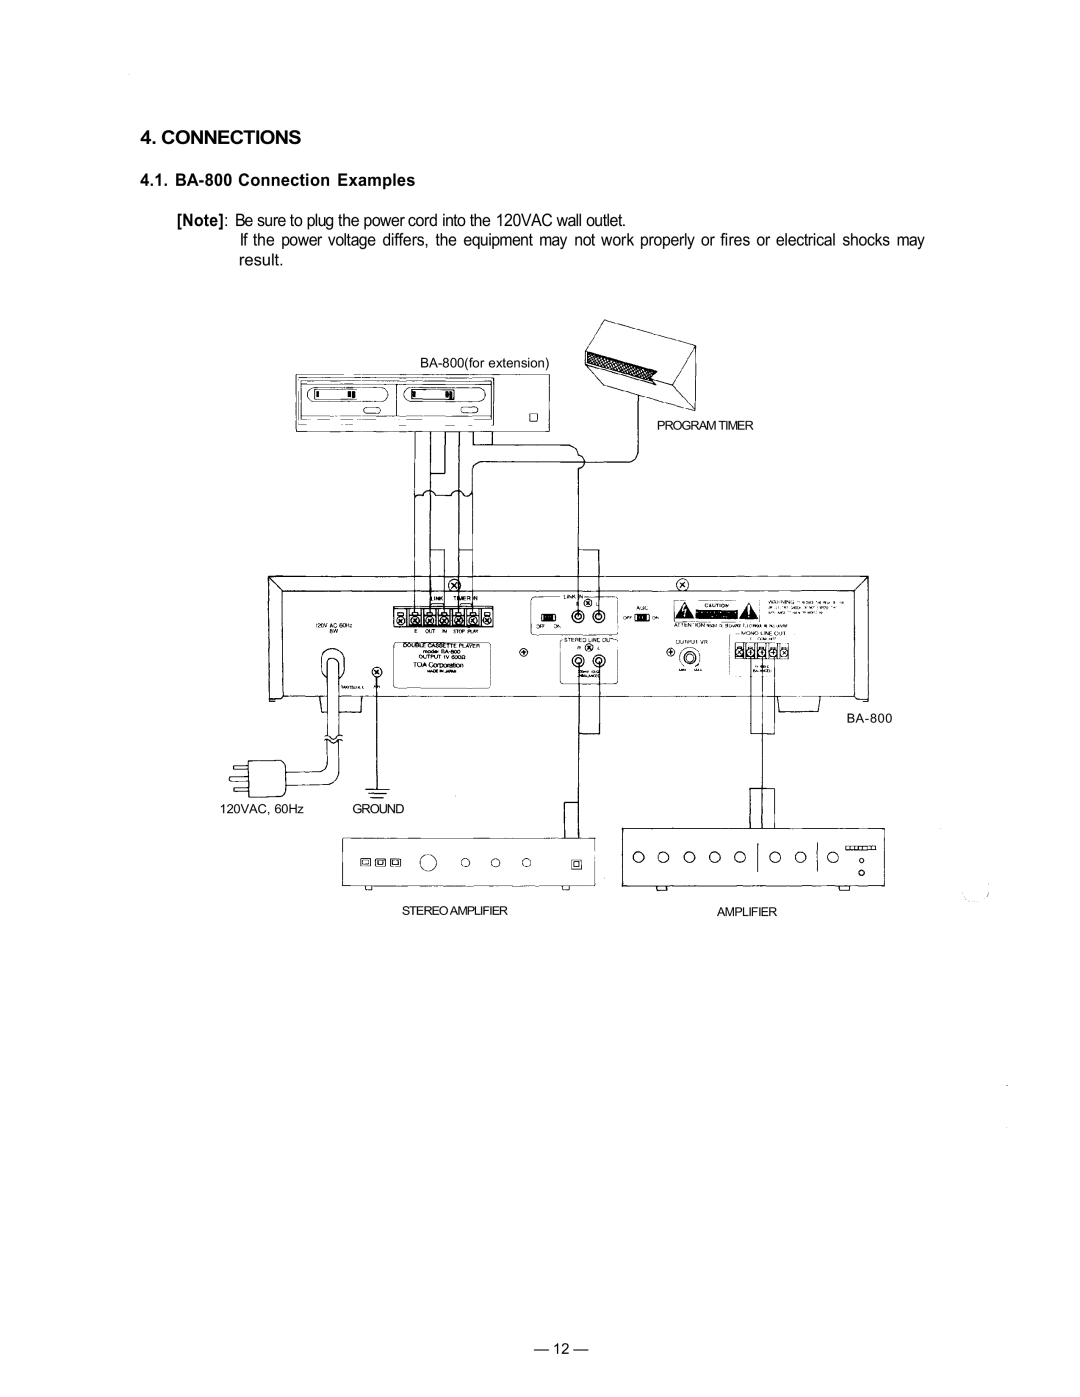 TOA Electronics manual Connections, 4.1.BA-800Connection Examples 